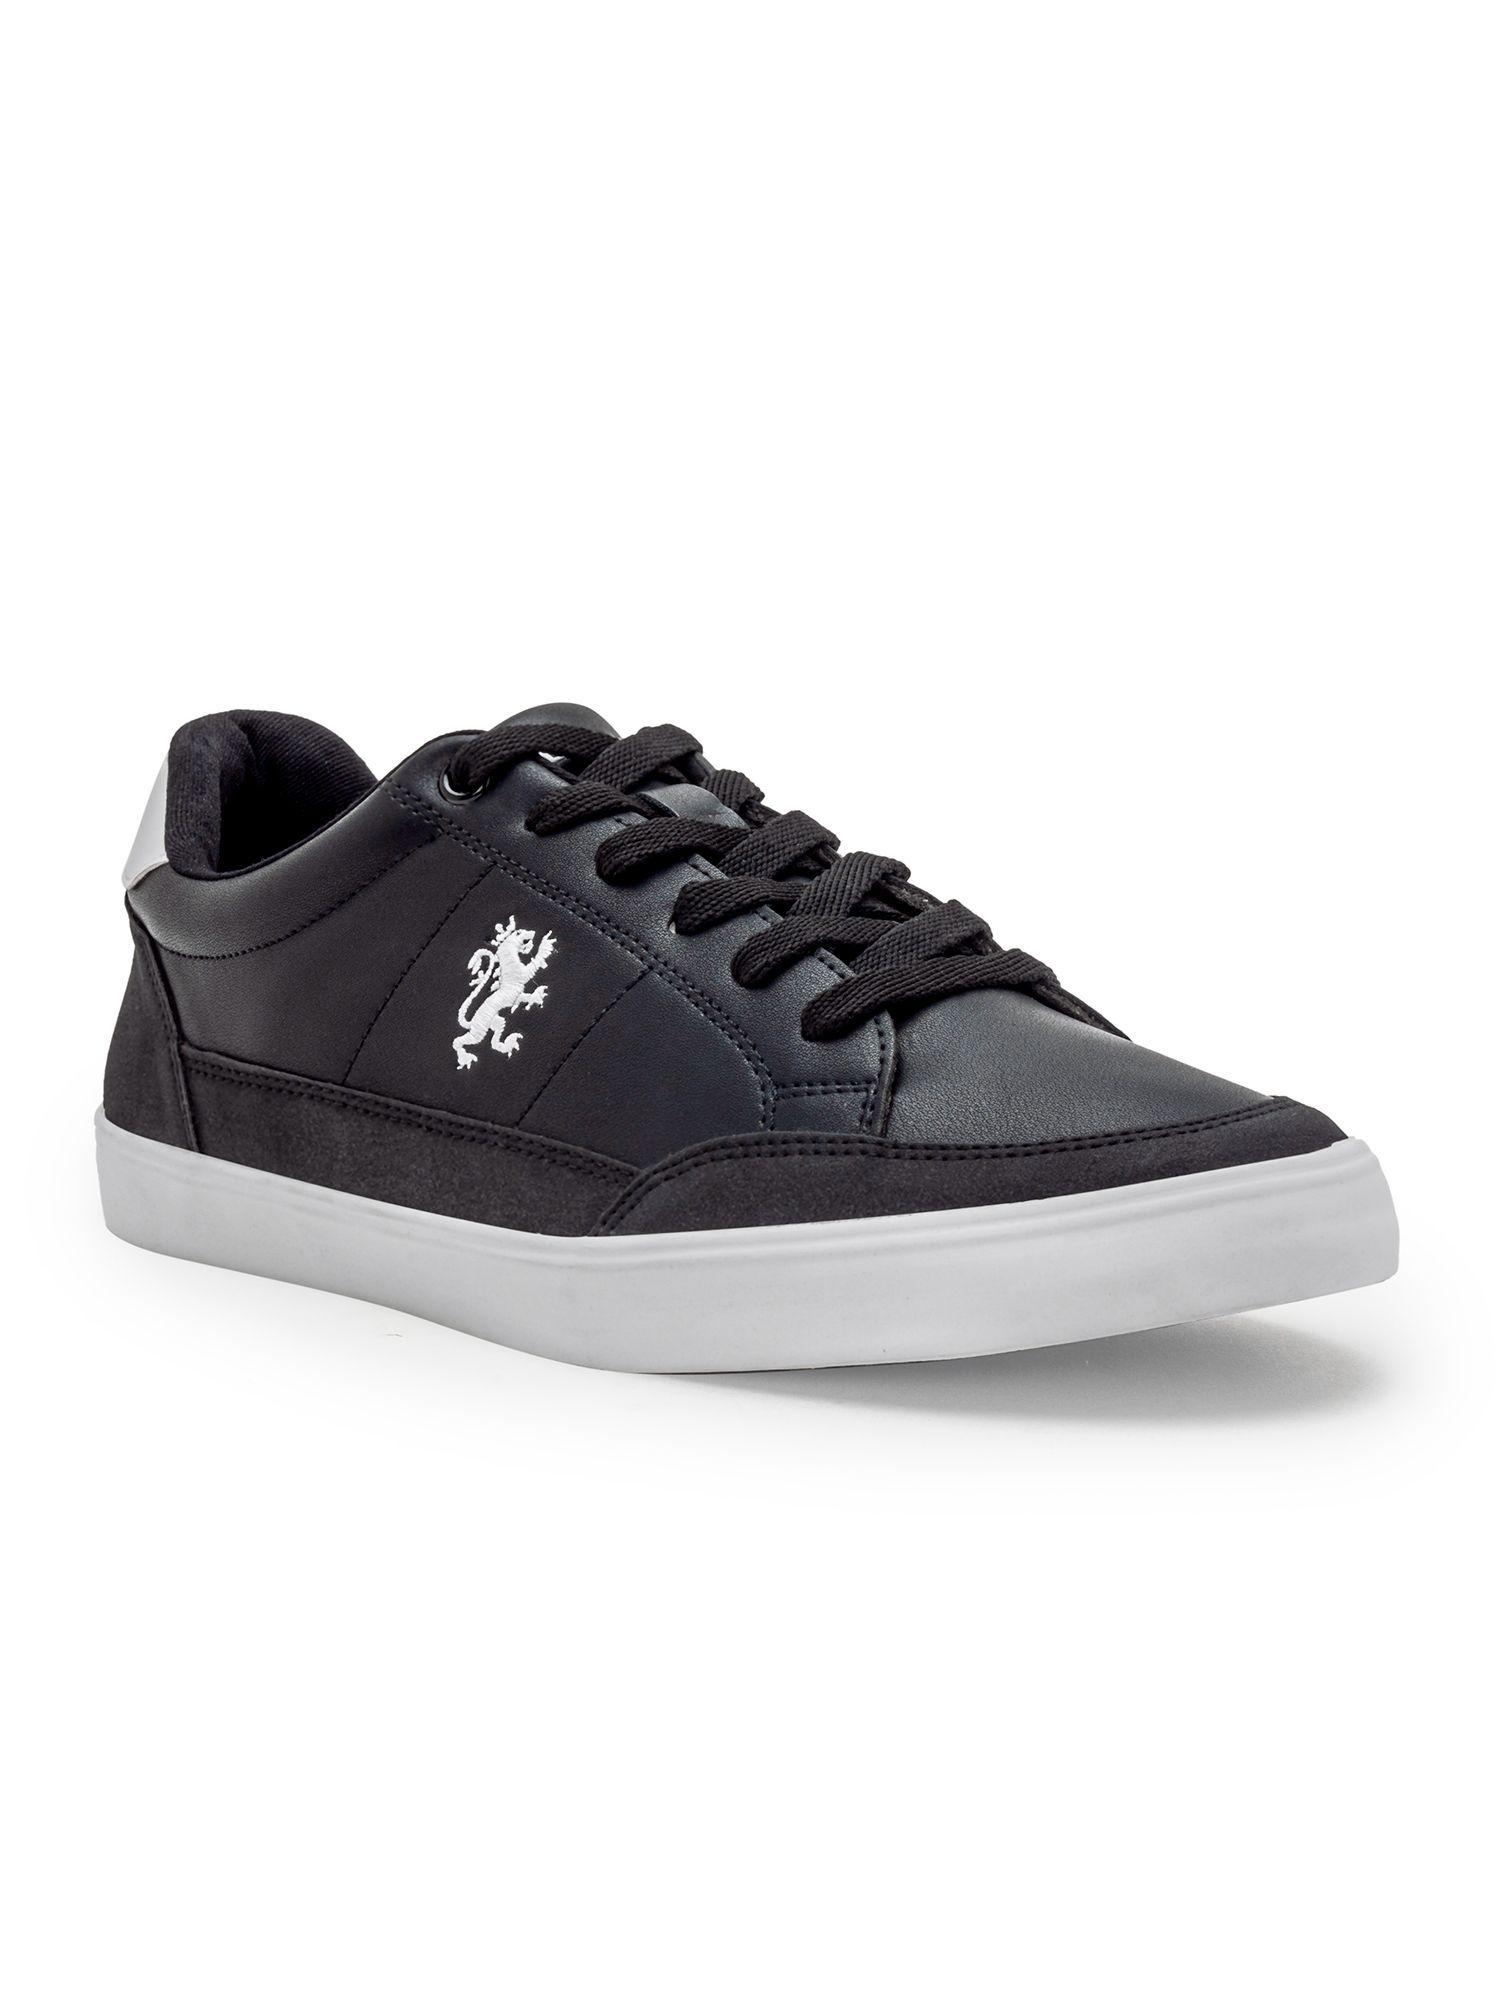 mens-solid-black-white-sneakers